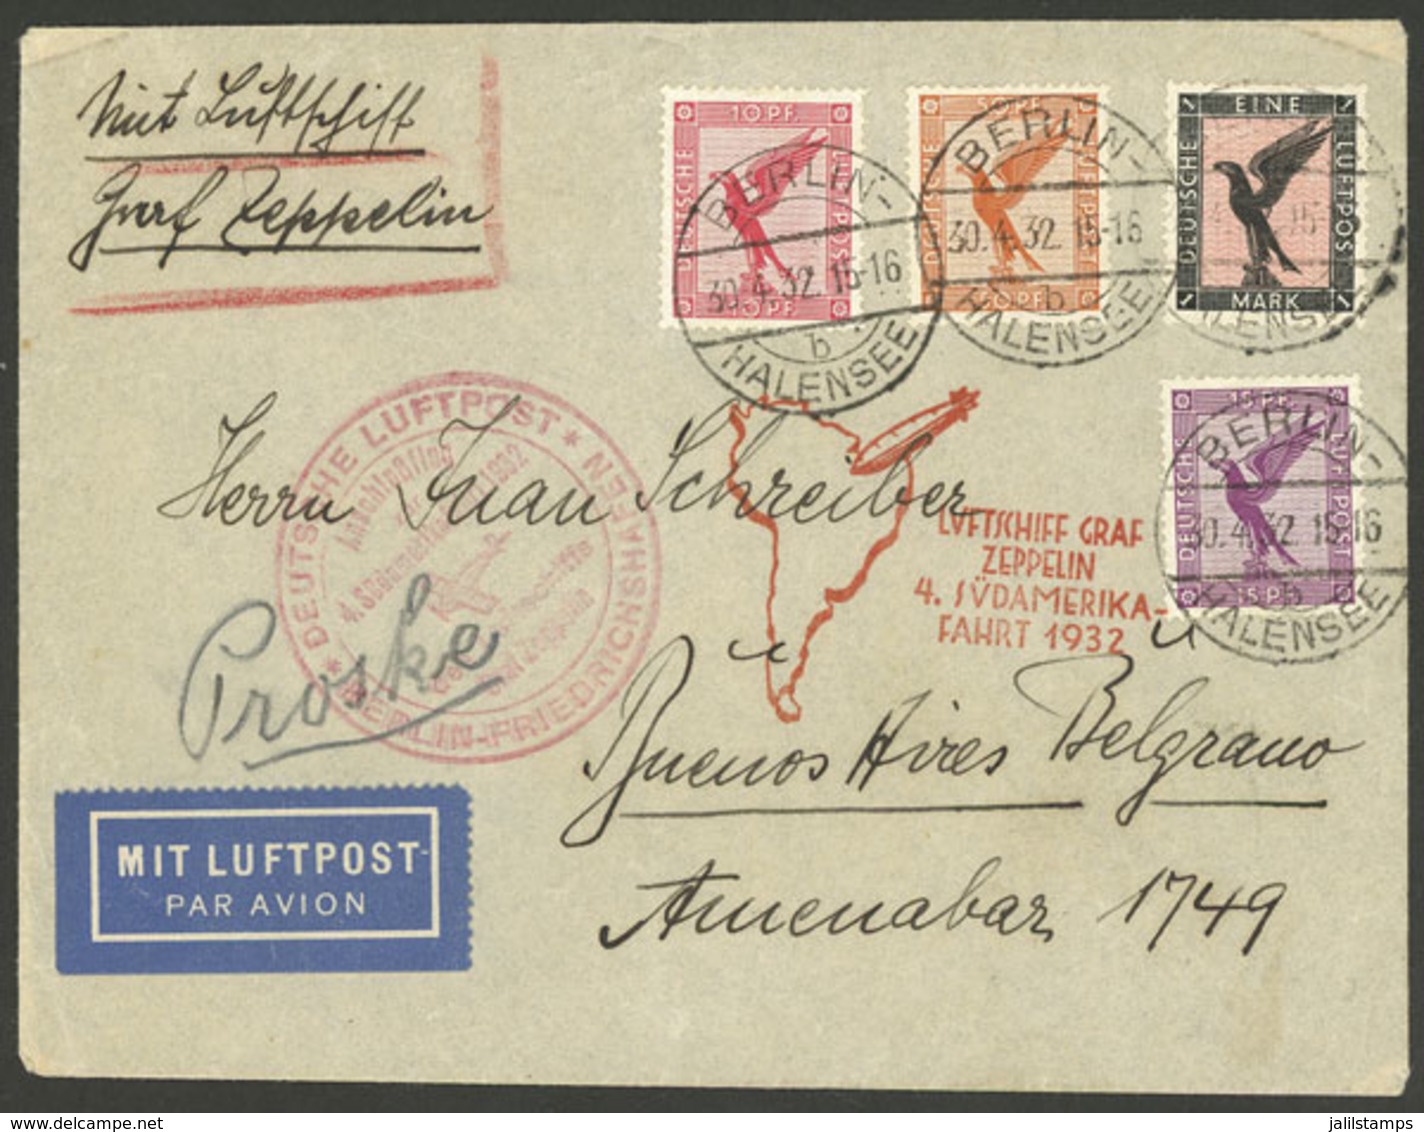 GERMANY: 30/AP/1932 Berlin - Buenos Aires, Cover Flown By Zeppelin, Very Nice! - Prephilately